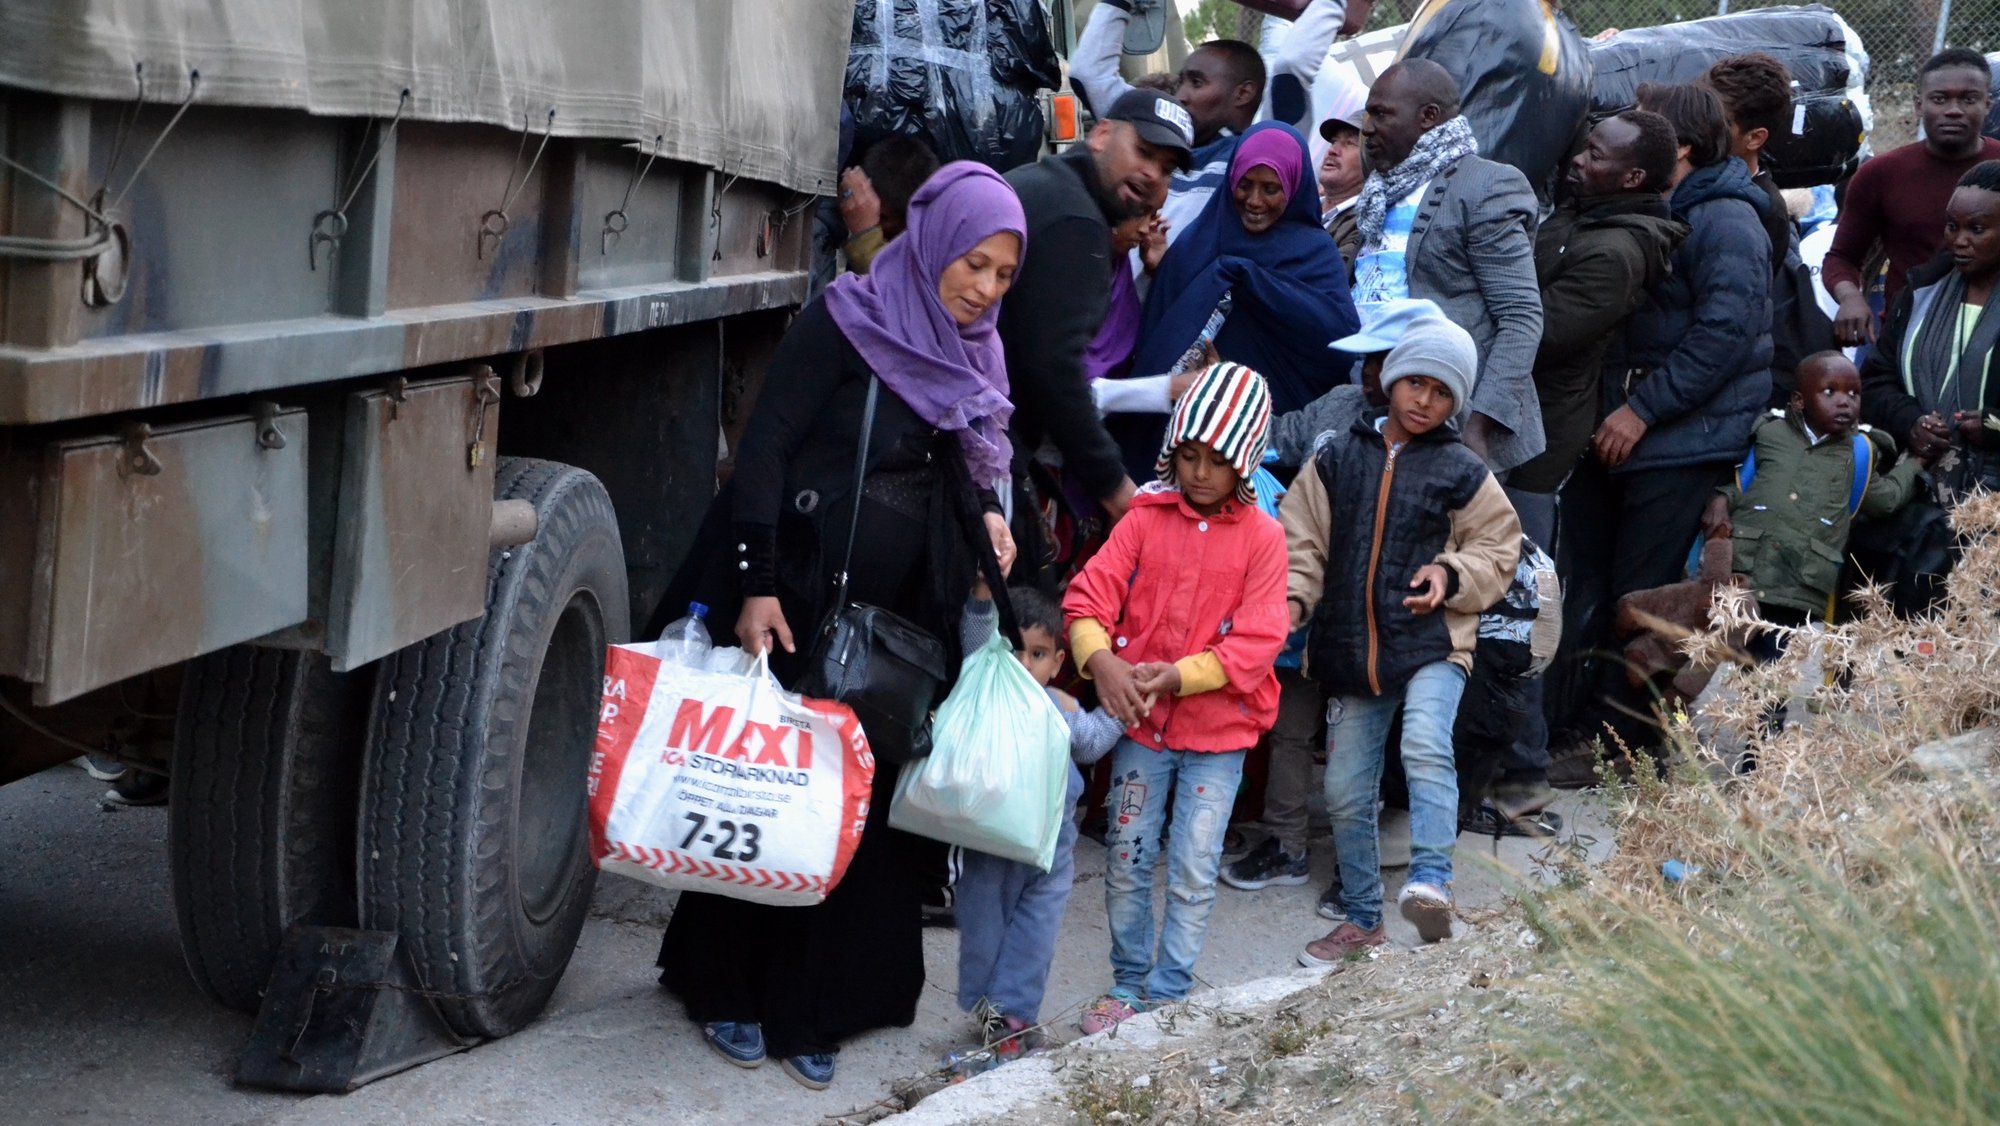 epa07965458 Refugees board a military vehicle outside the hotspot in Moria, Lesvos island, Greece, 01 November 2019, to be transferred by navy ships to the mainland Greece. Over 1,000 asylum applicants will be transferred from NE Aegean islands to the mainland in the next three days. According to sources speaking to Athens-Macedonian News Agency, all refugees will be distributed evenly in the mainland Greece. Two navy ships carrying 800 individuals from Lesvos will arrive at Elefsina port on 02 November, while another 100 will be transferred from Samos to Piraeus port on 03 November and another 130 asylum applicants will arrive in Piraeus the next days from Chios, Kos and Leros islands.  EPA/STRATIS BALASKAS